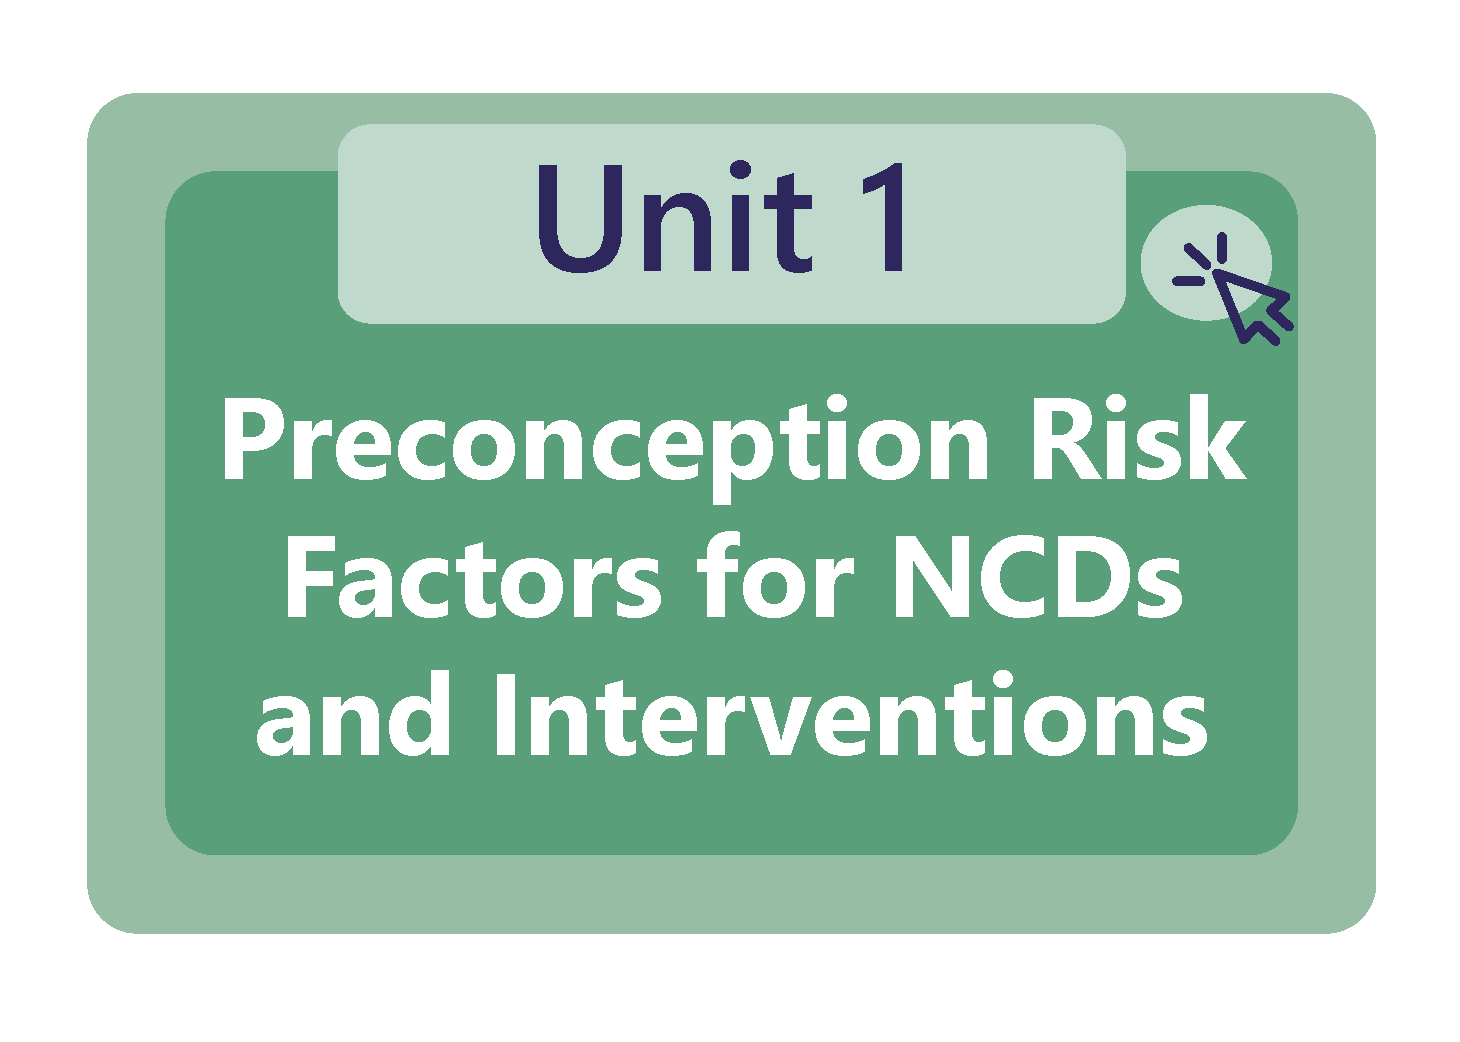 Preconception risk factors for NCDs and interventions